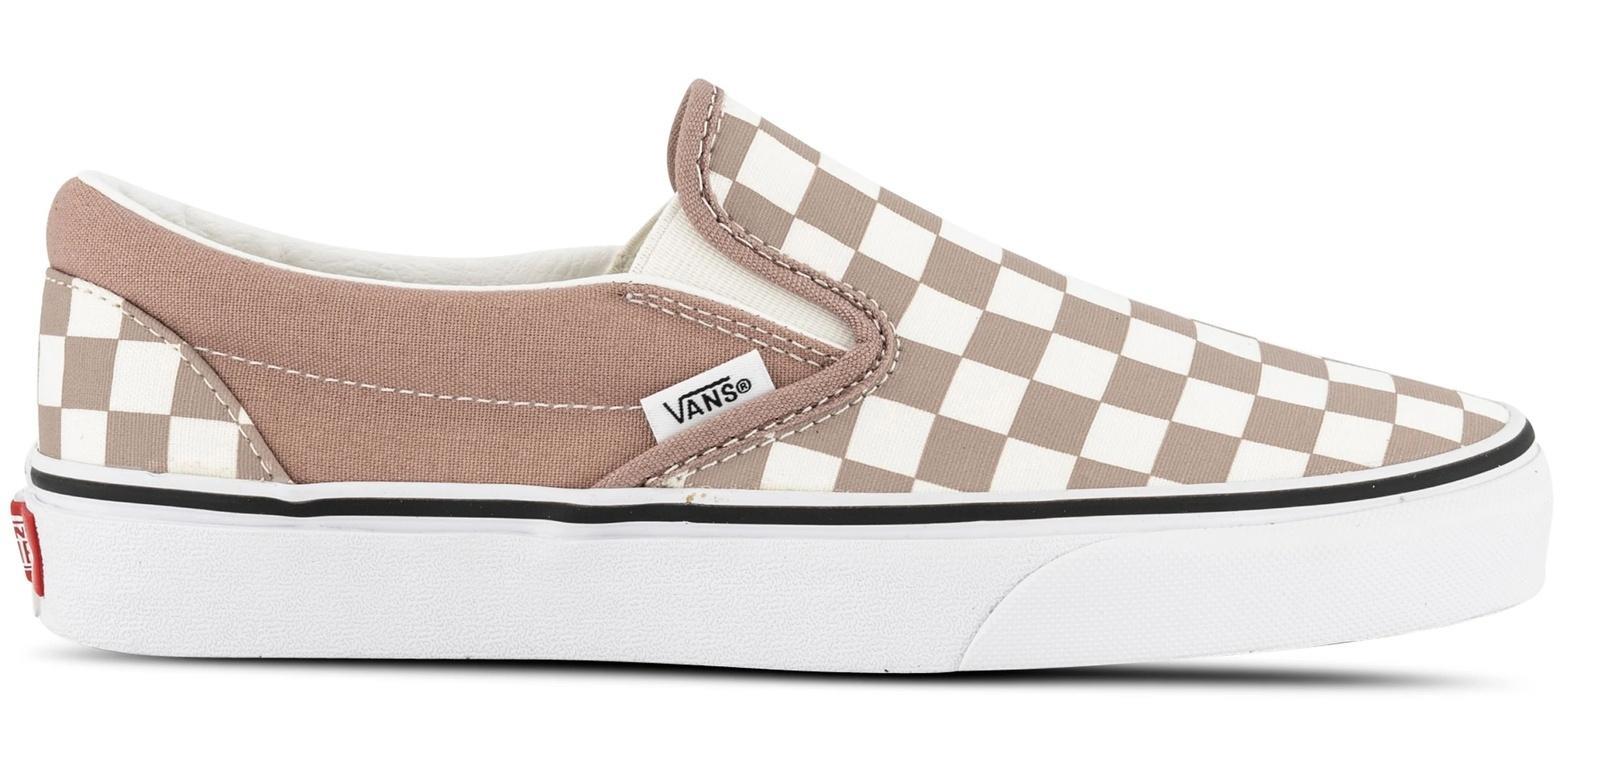 Vans Classic Slip On Canvas Sneaker Shoes Chess Check - Etherea/True White - US 12